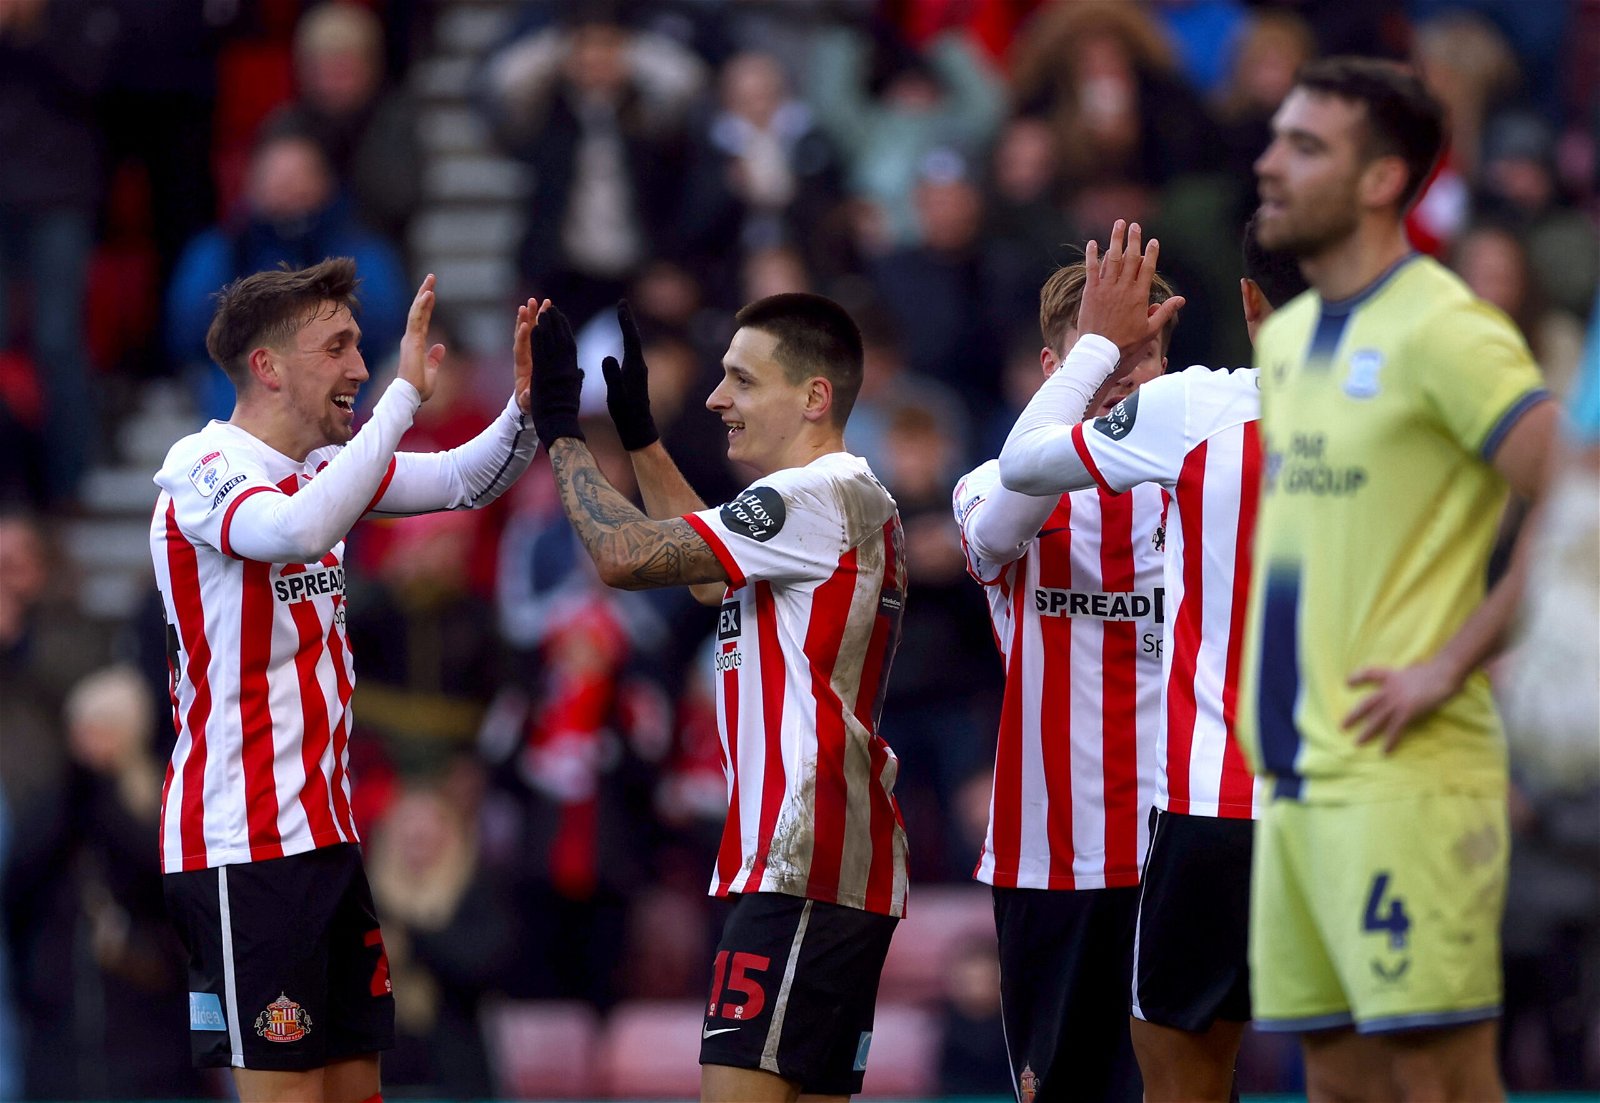 Sunderland: 3 players who could play in the Premier League in the future